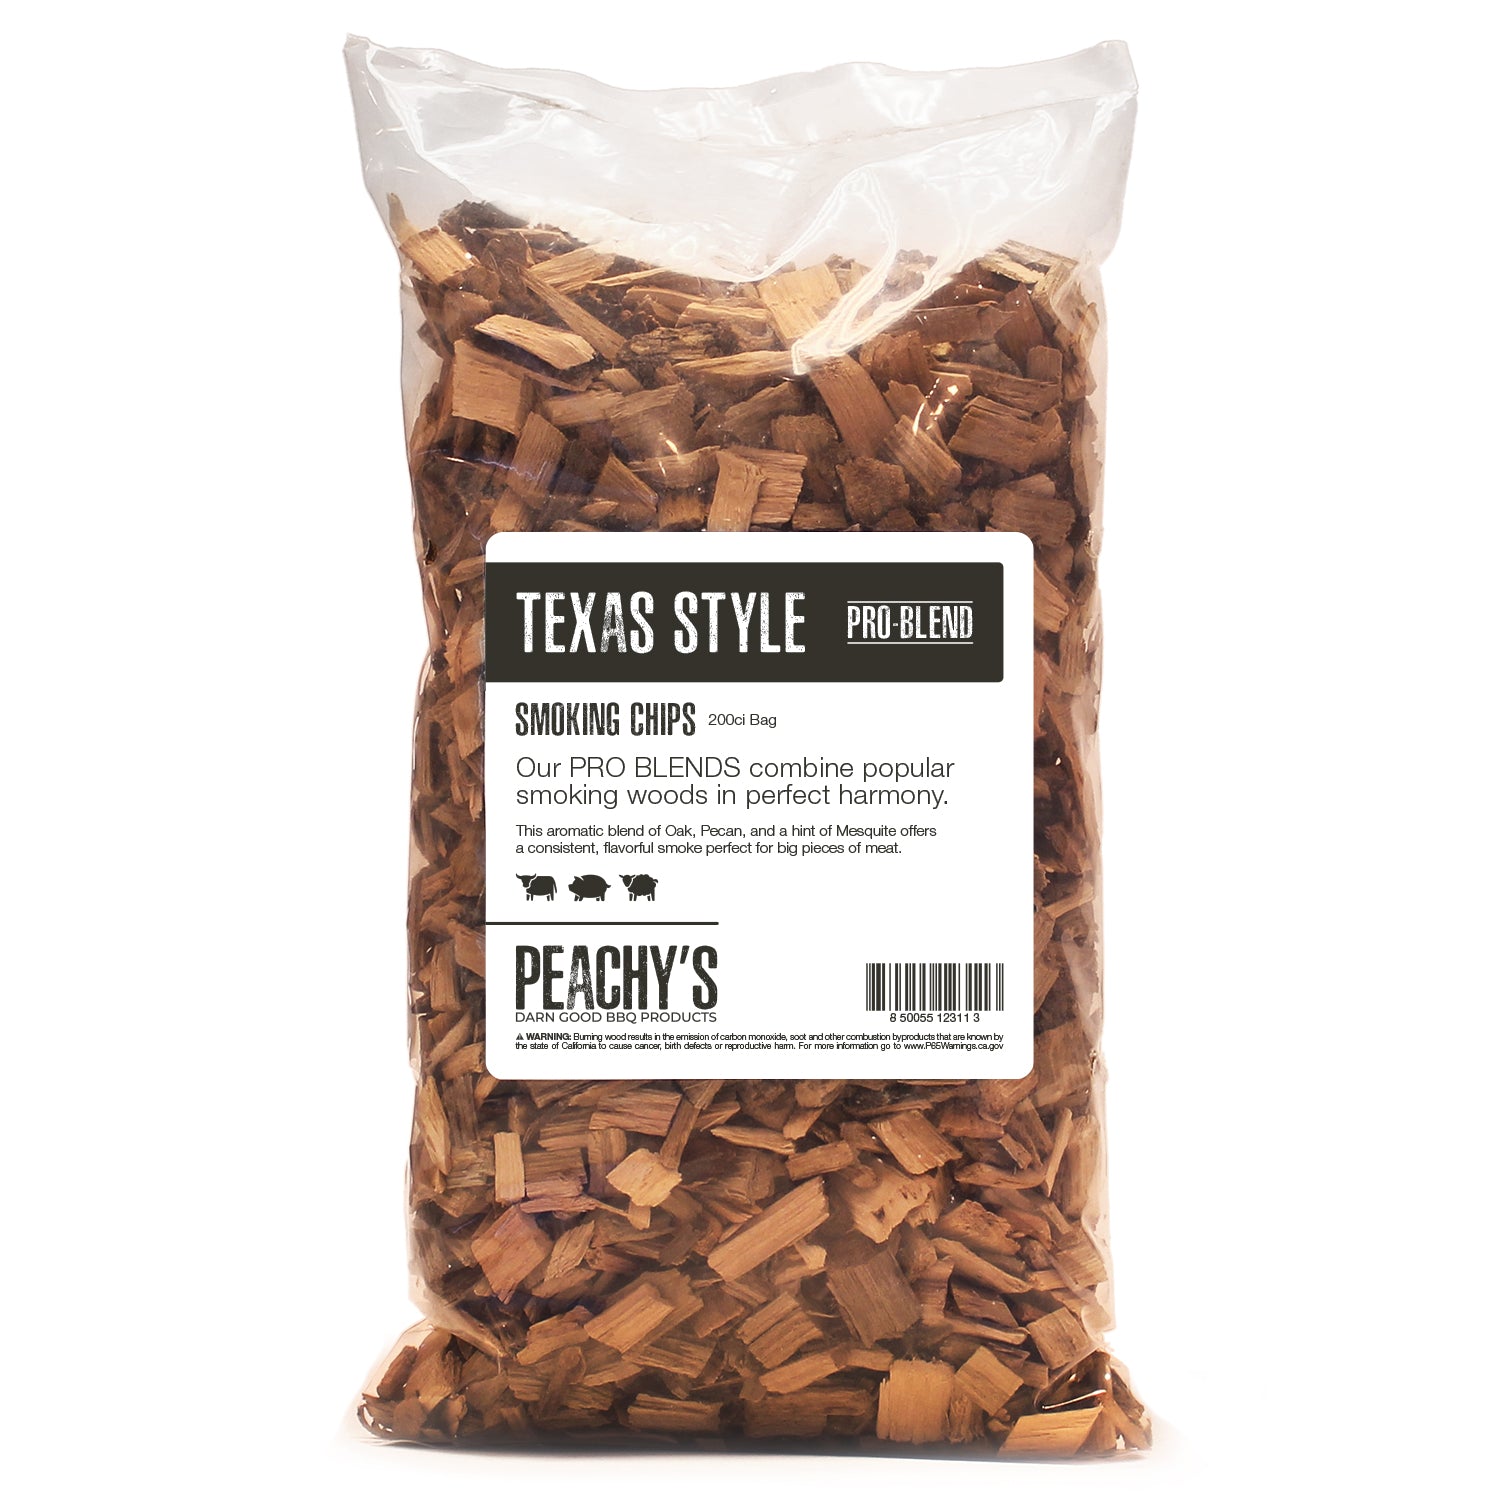 TEXAS STYLE PRO-BLEND Chips | 200ci Bag of Premium Smoking Woods by PEACHY'S